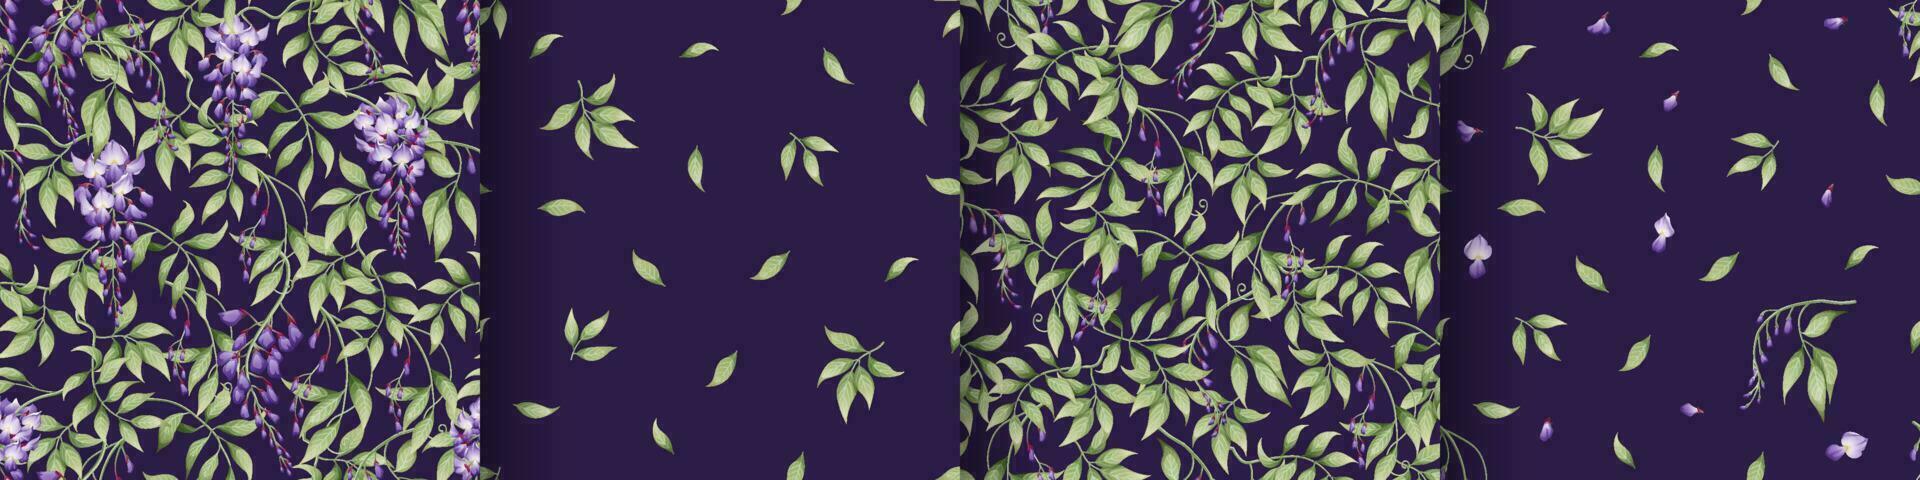 Set of seamless patterns with purple wisteria and green leaves on a dark background. Texture in Asian style. Suitable for fabric, paper, textile, wallpaper vector